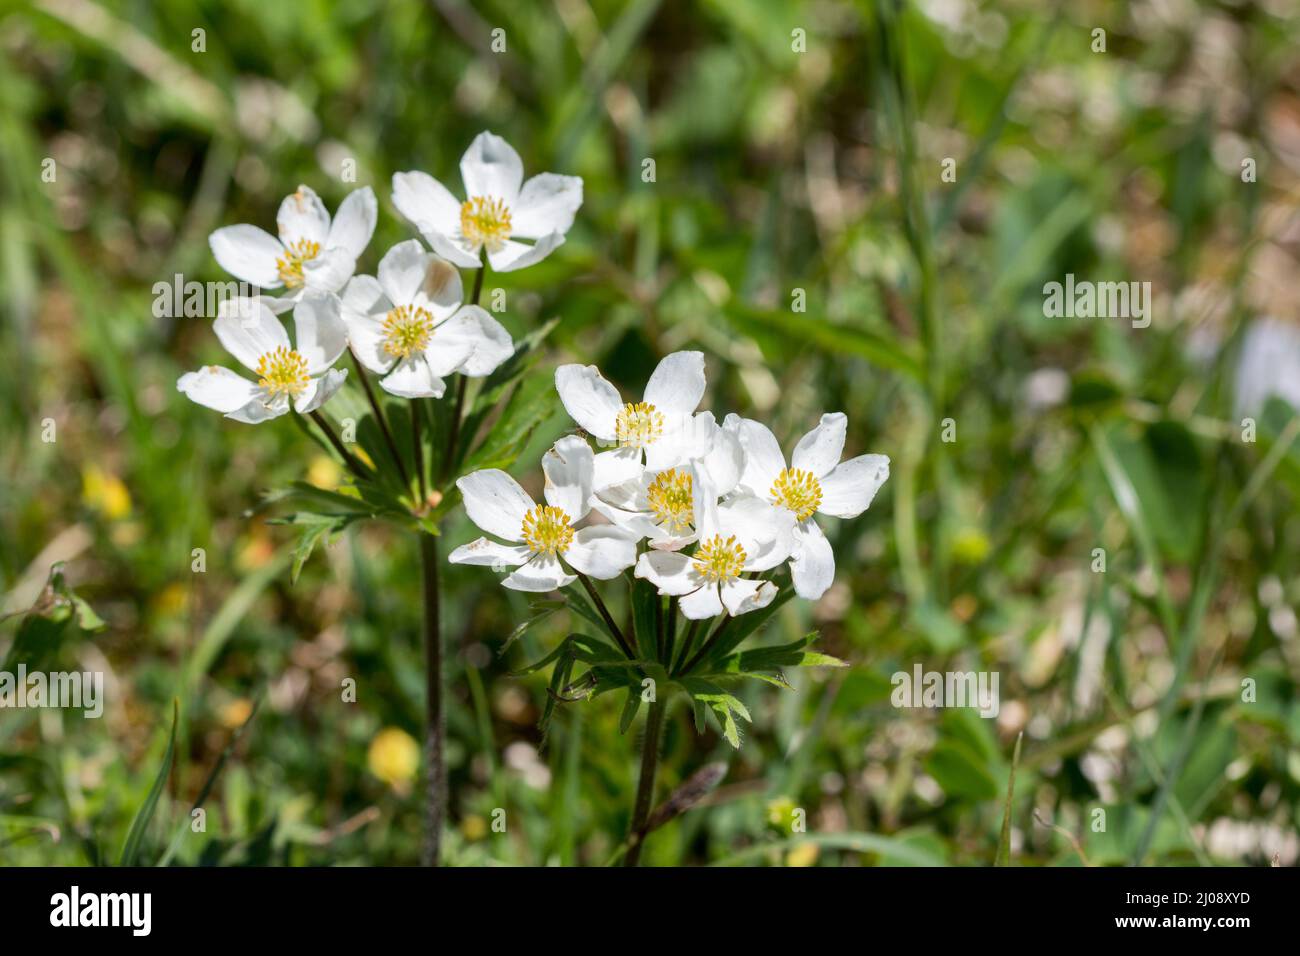 Alps Flora: narcissus anemone or narcissus-flowered anemone Stock Photo